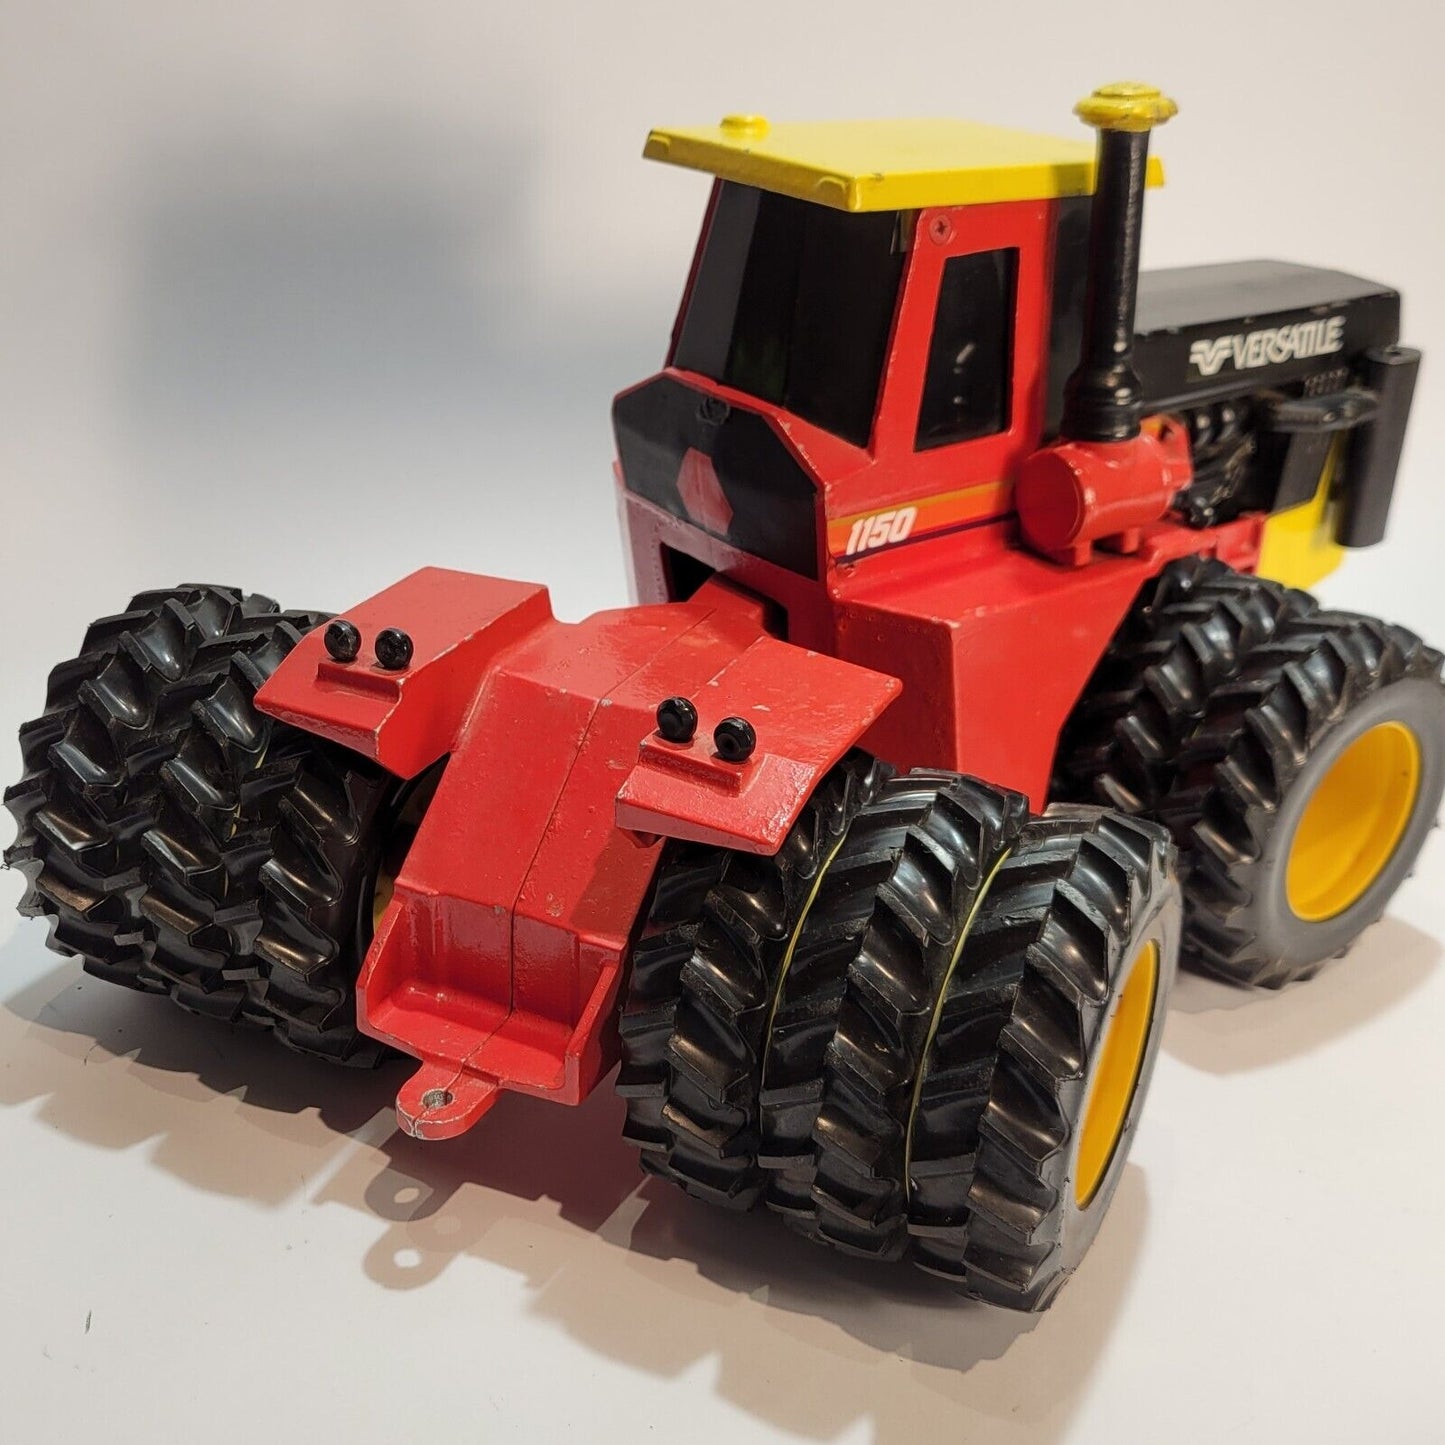 Versatile 1150 4wd Tractor With Triples 1/16 Scale Models / Ertl Farm Toy